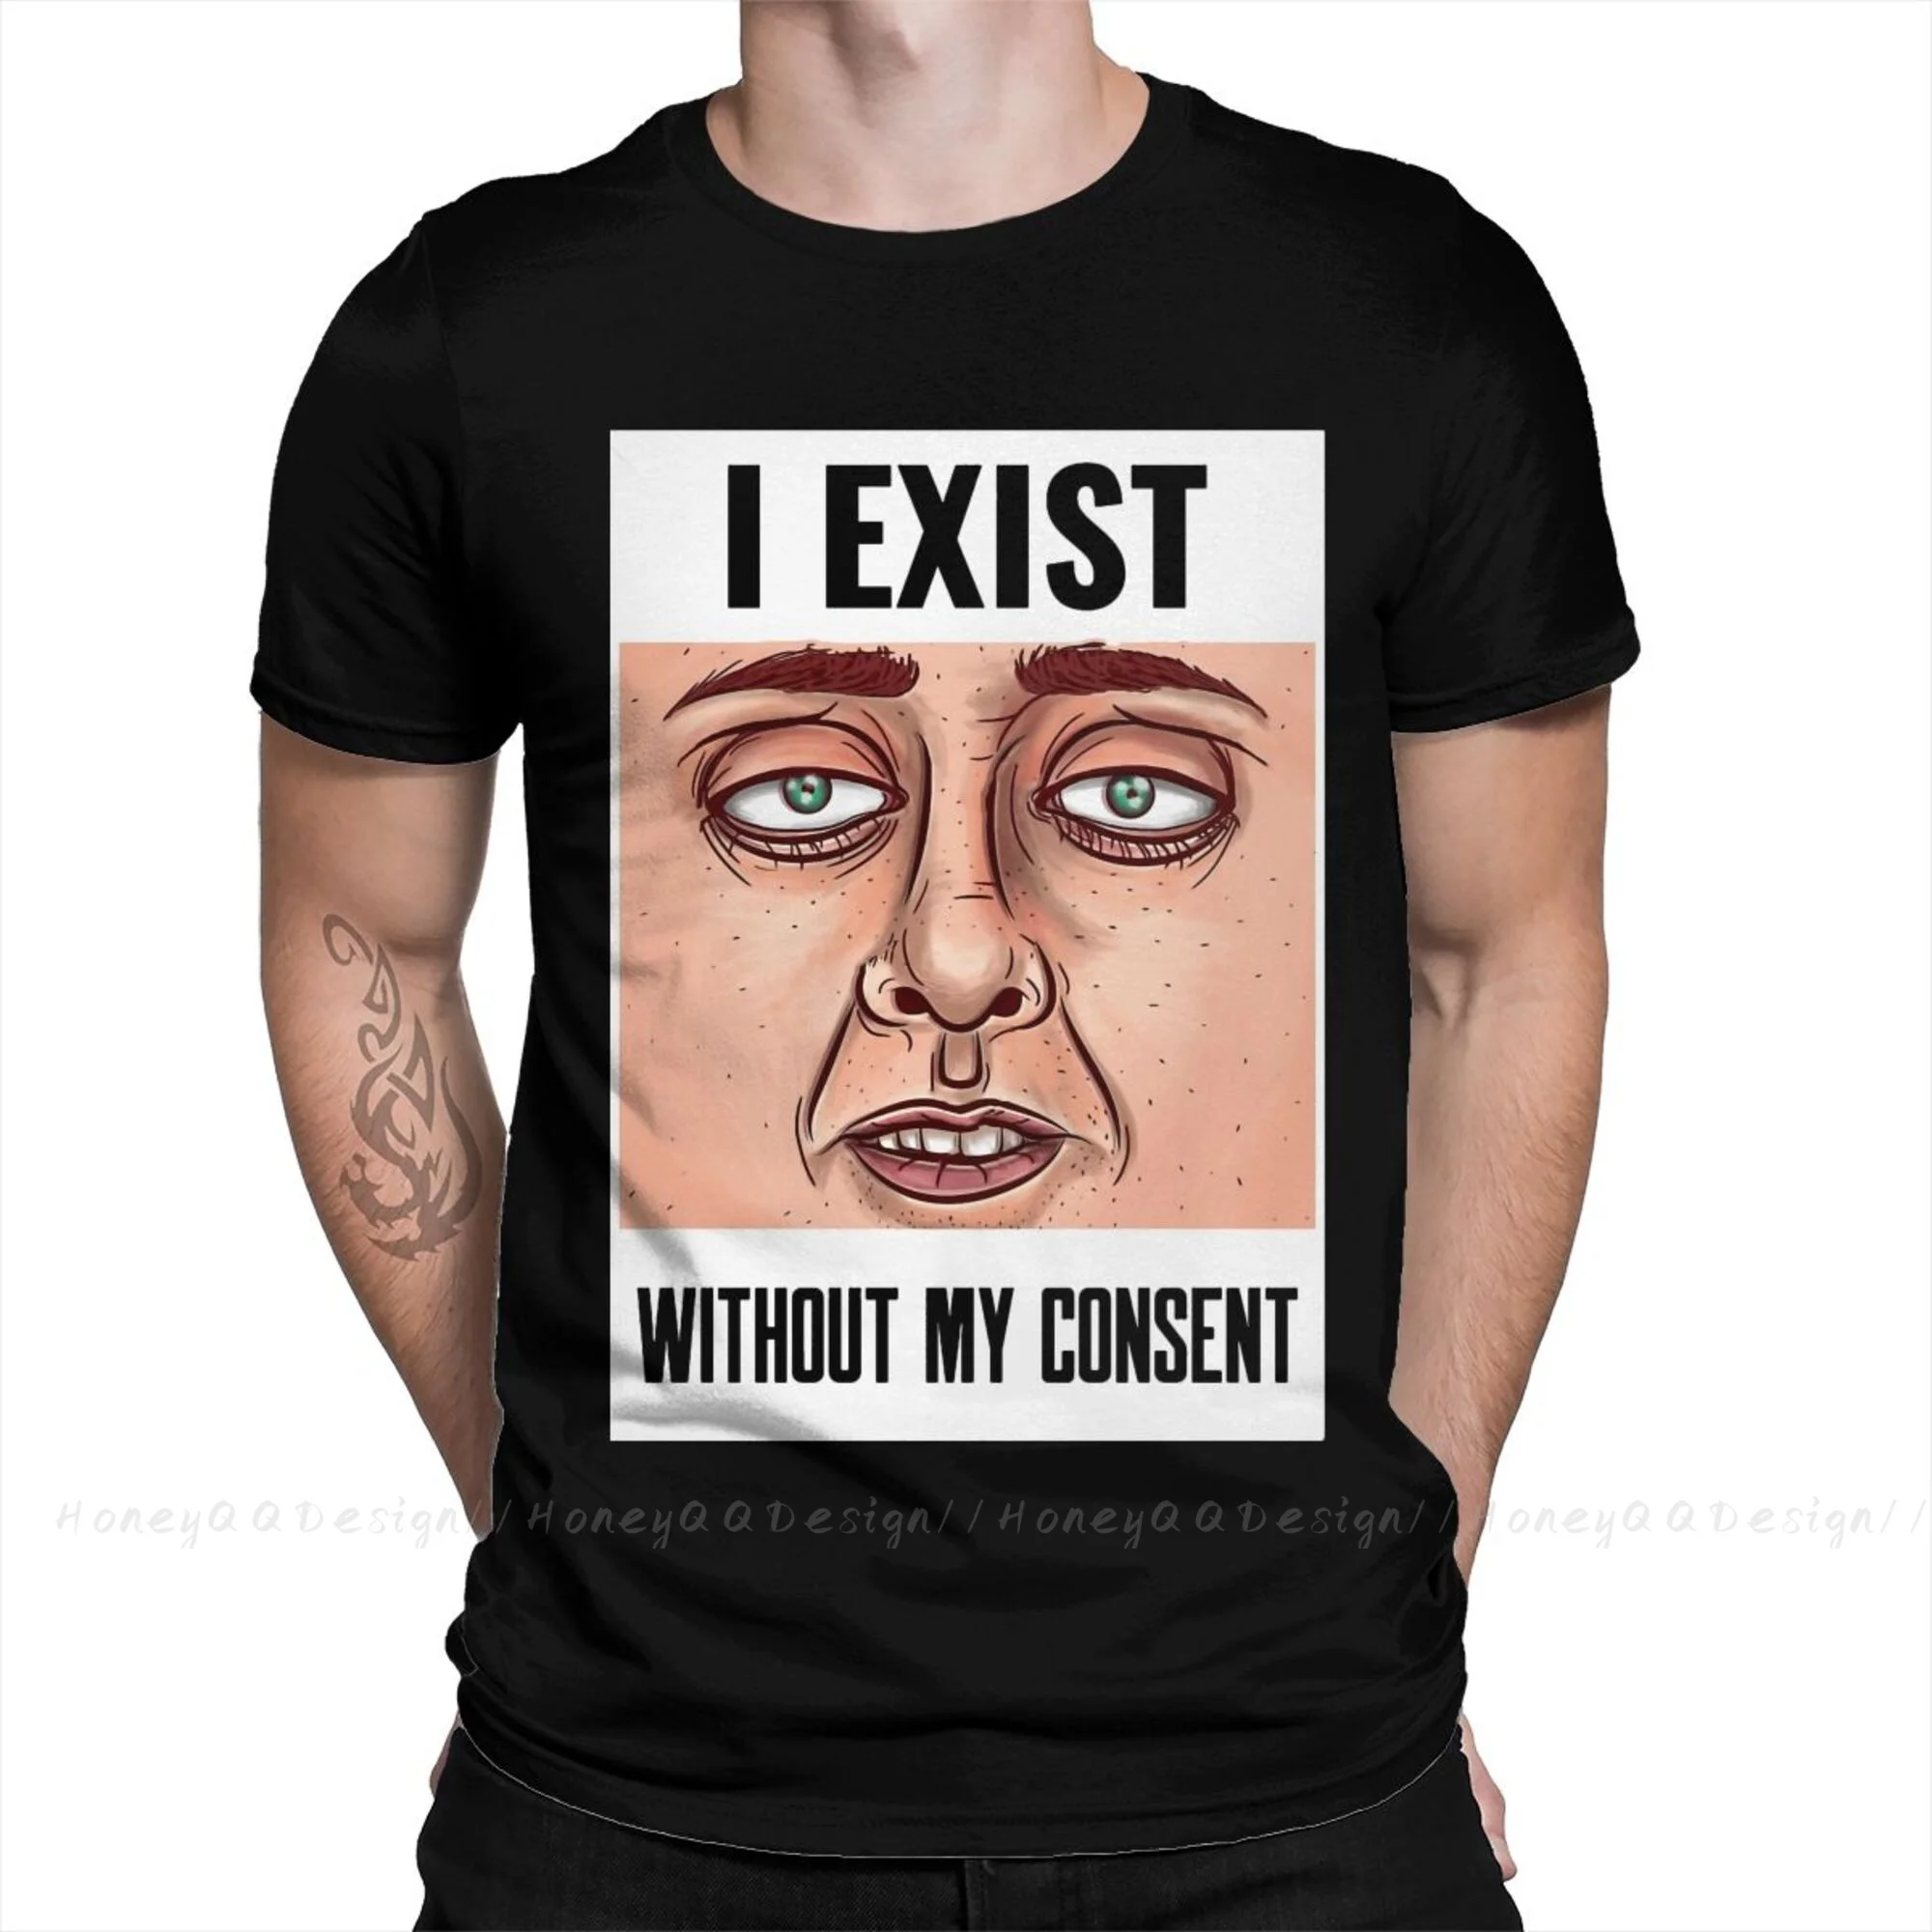 Cool Fashion Shirt Design I Exist Without My Consent Frog Cotton Shirts Men T-Shirt Oversize For Adult Tee